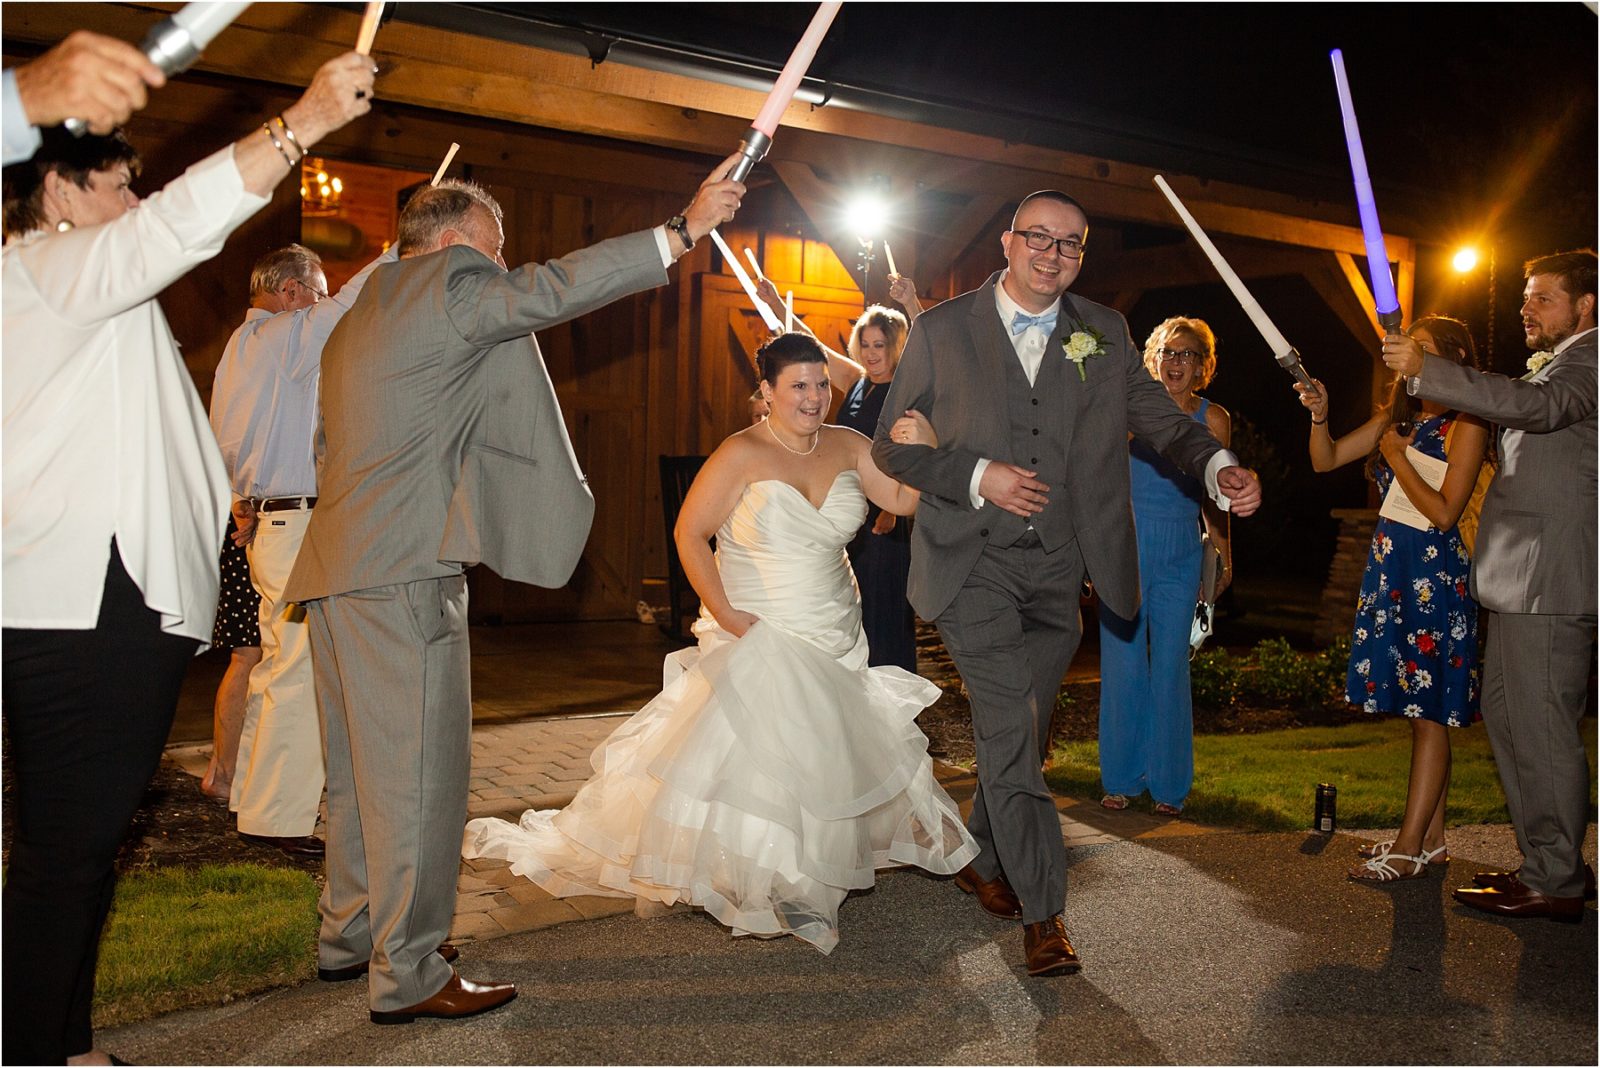 Man and woman leave wedding reception under light sabers